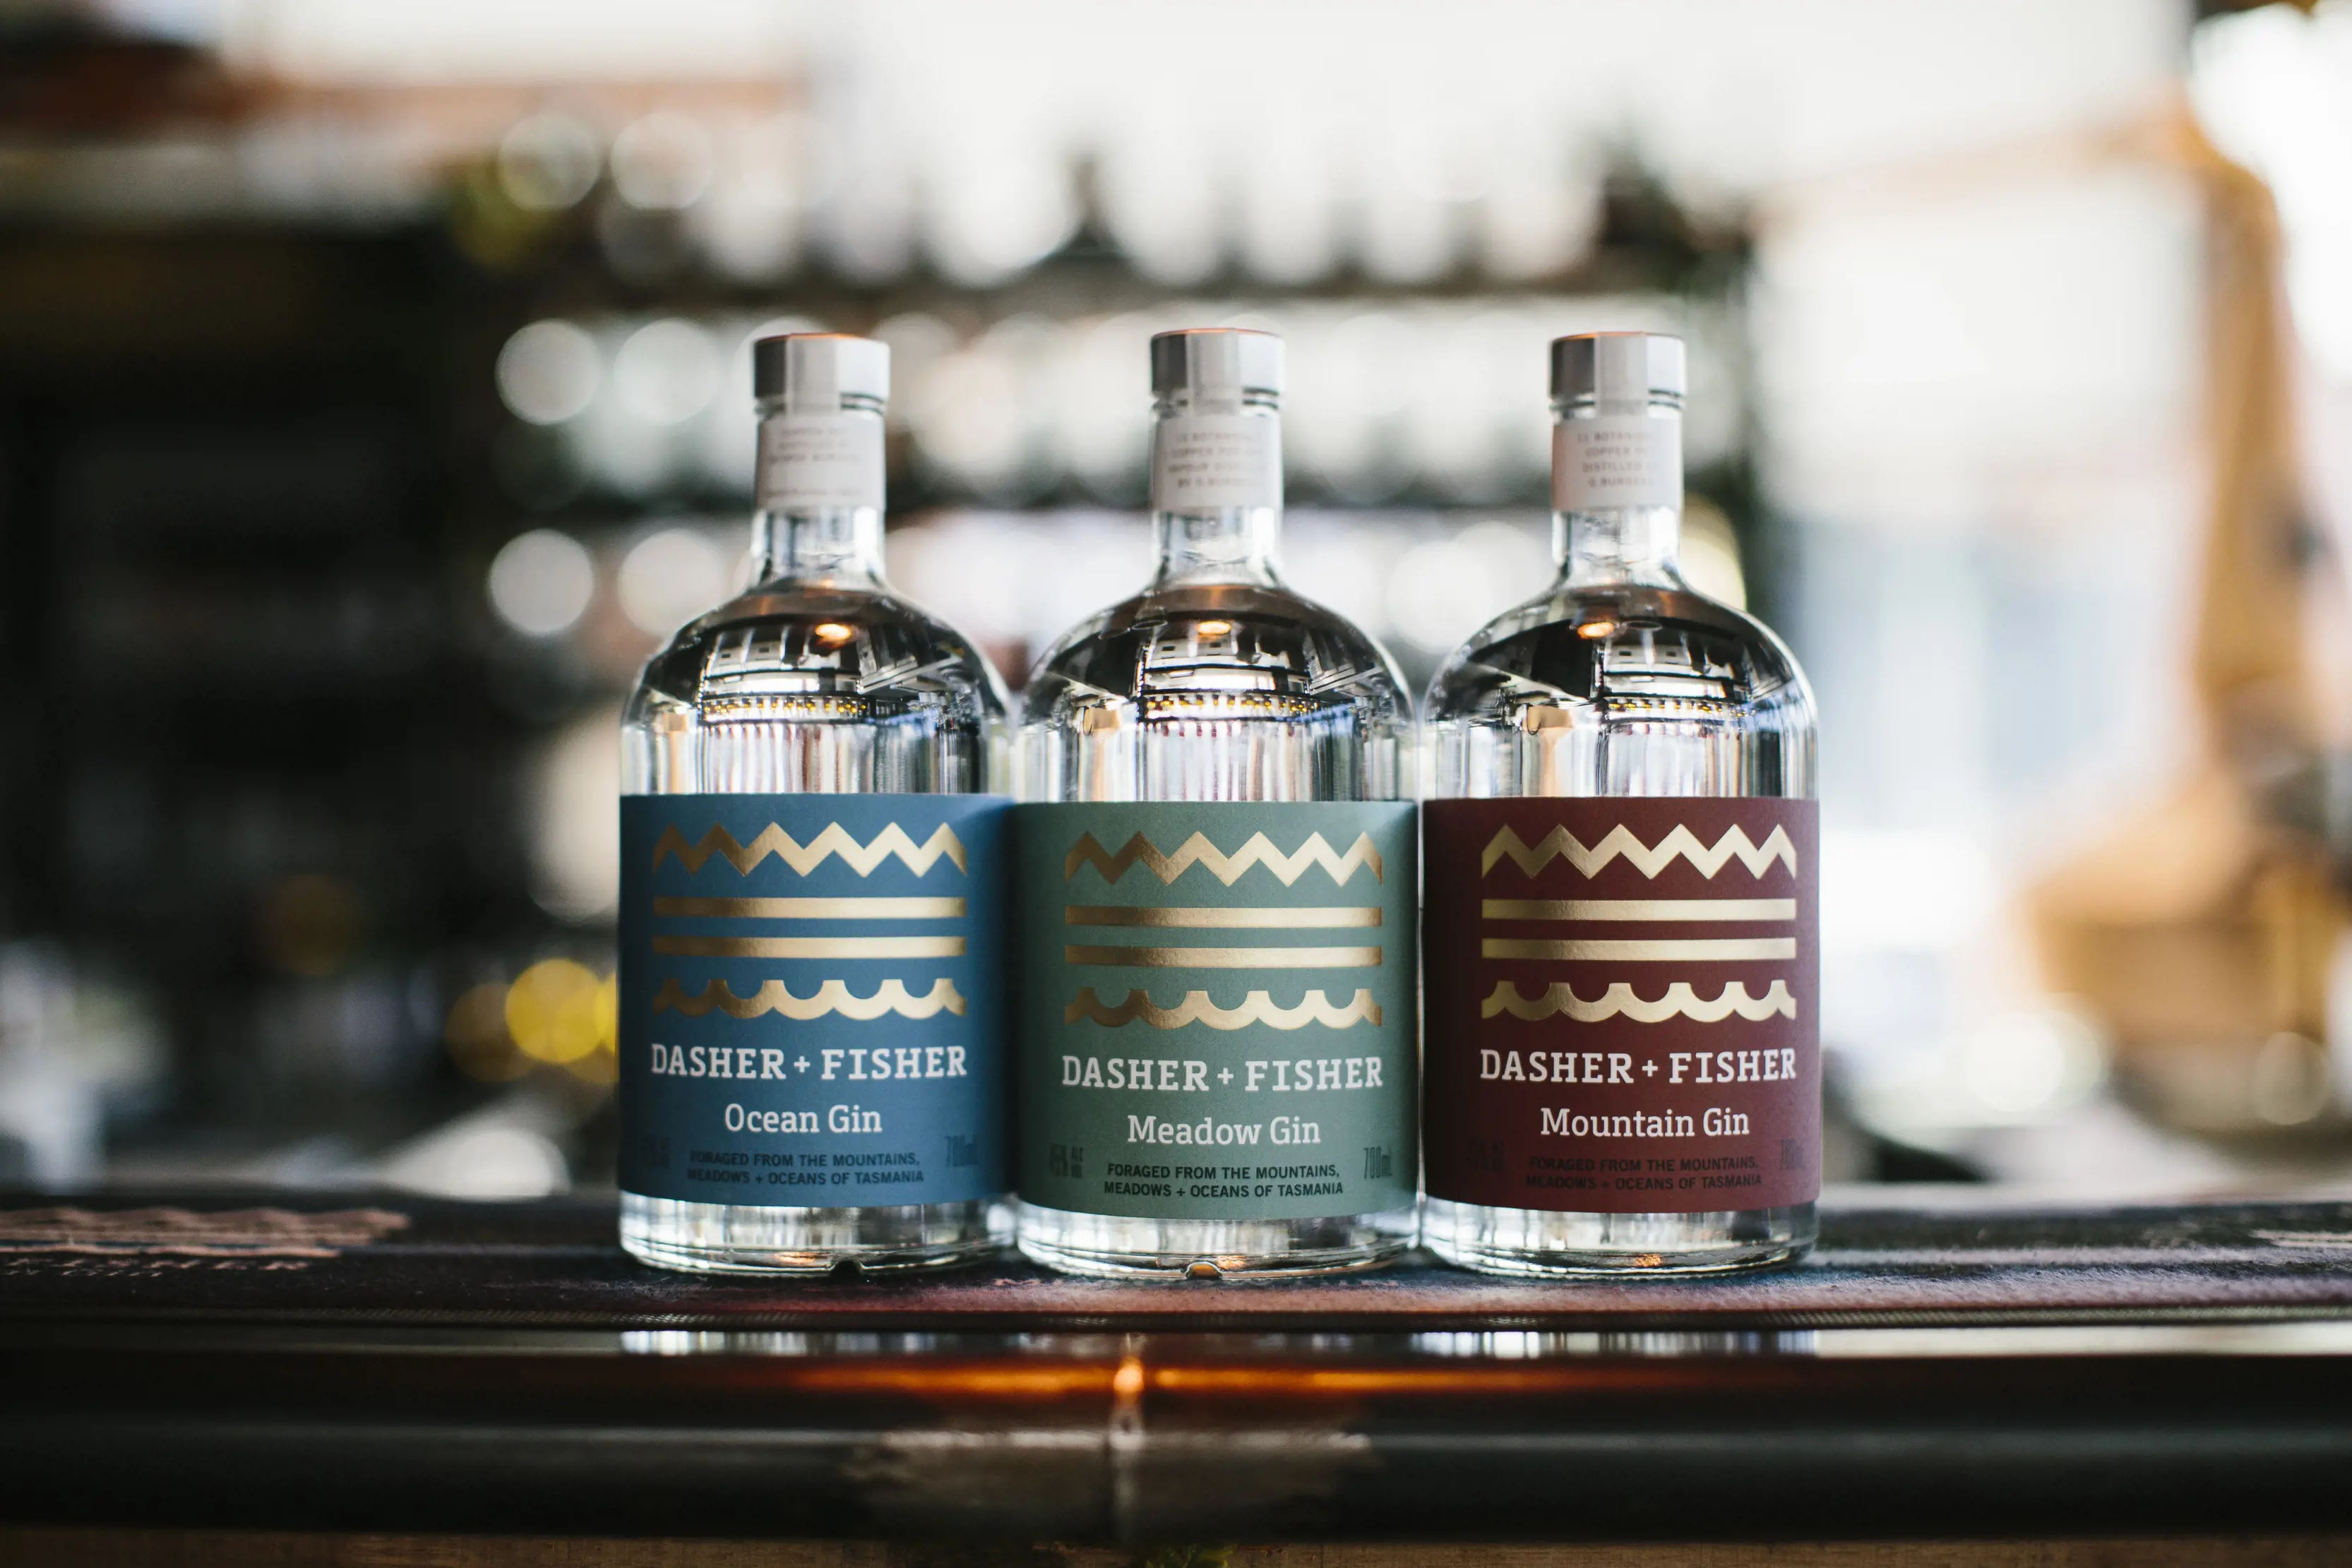 "Image of Southern Wild Distillery's Dasher and Fisher Gin and their three different flavours. "